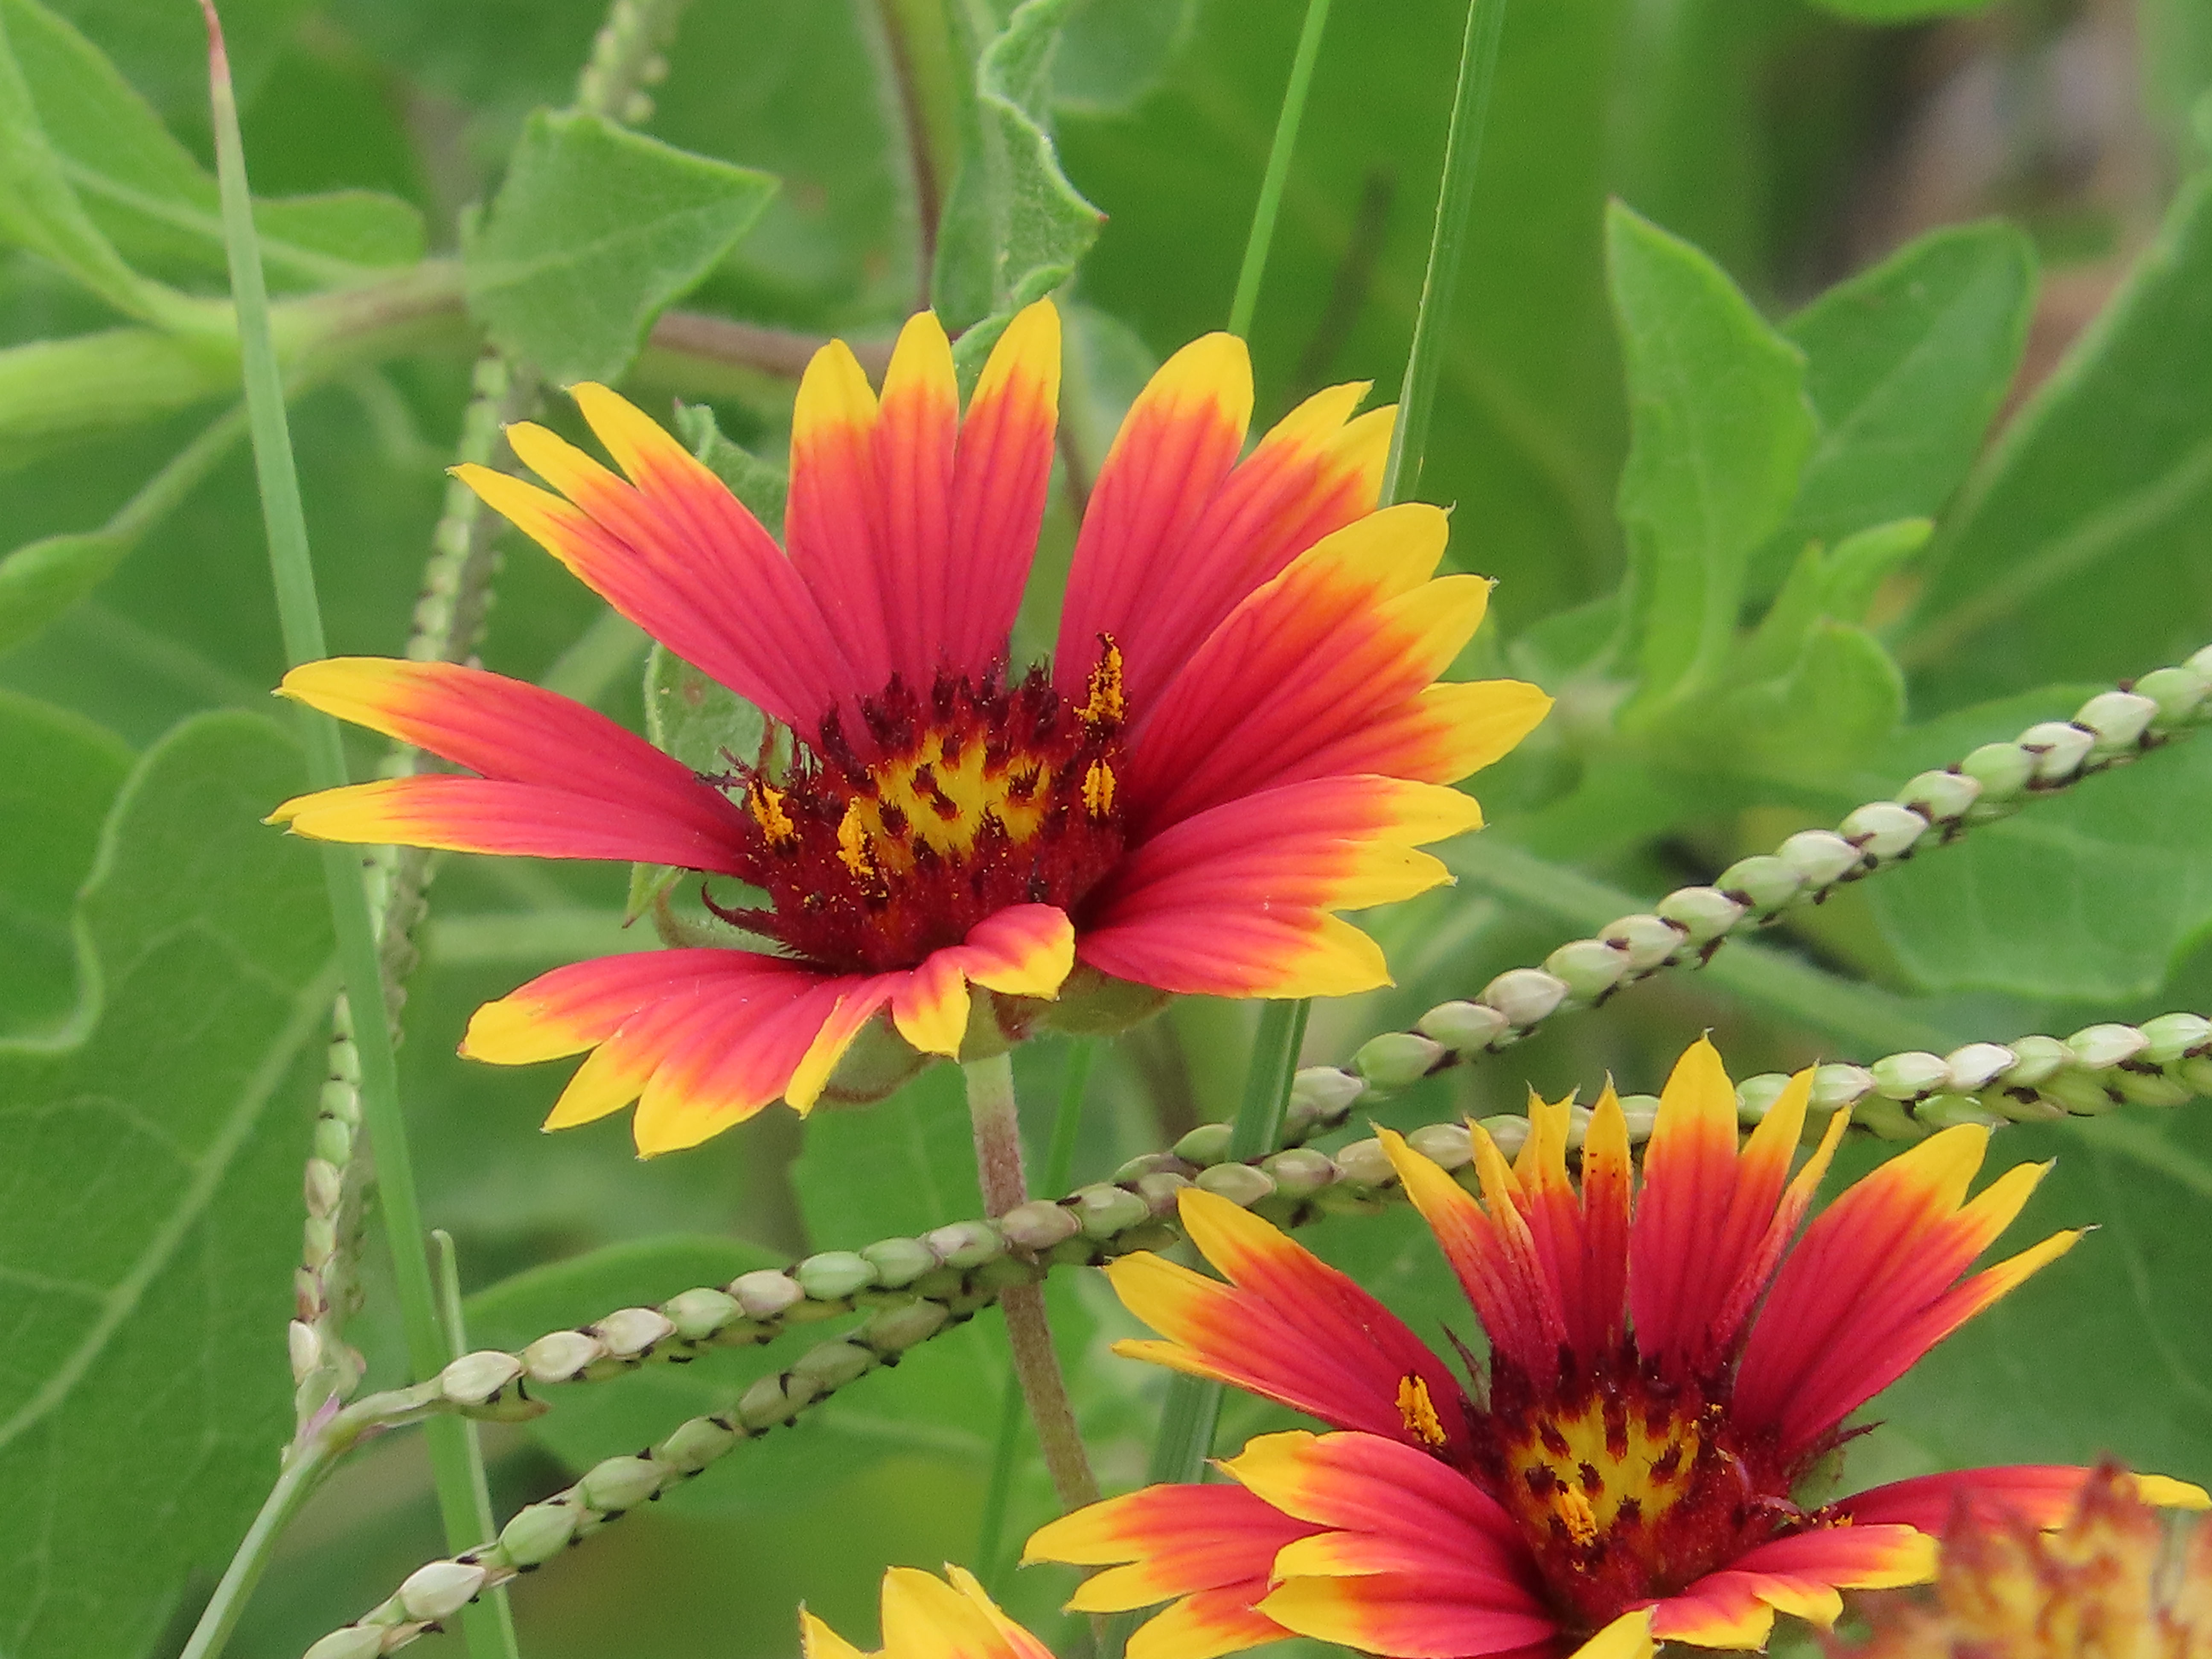 Brightly colored yellow edged and orange flowers in green leaves and stems